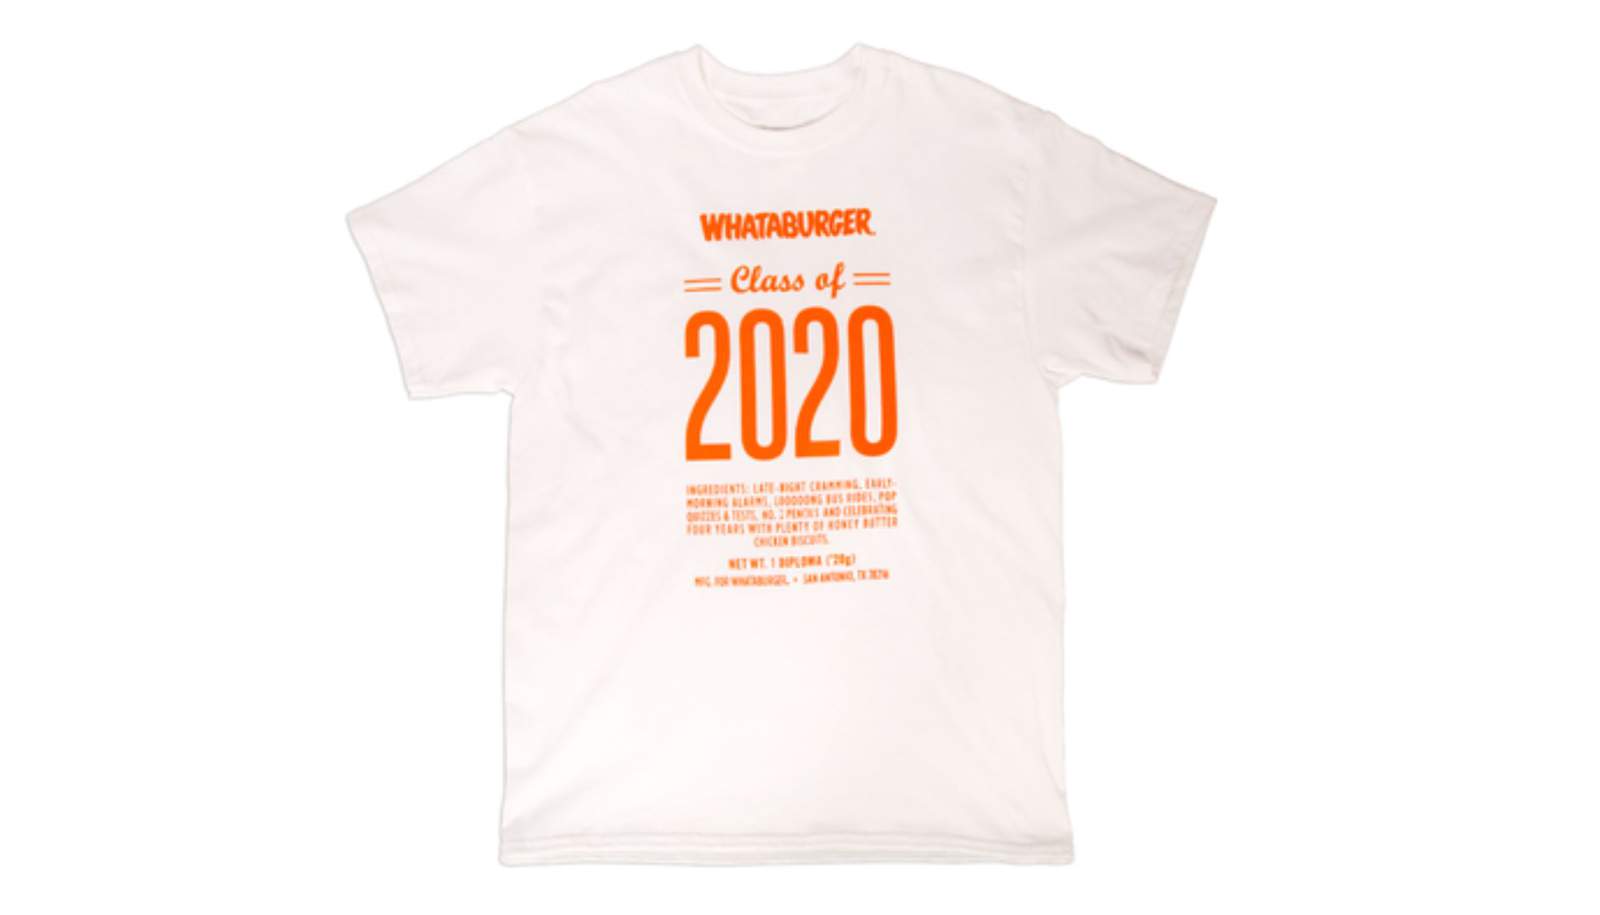 Whataburger celebrates the Class of 2020 with these burger-tastic gifts